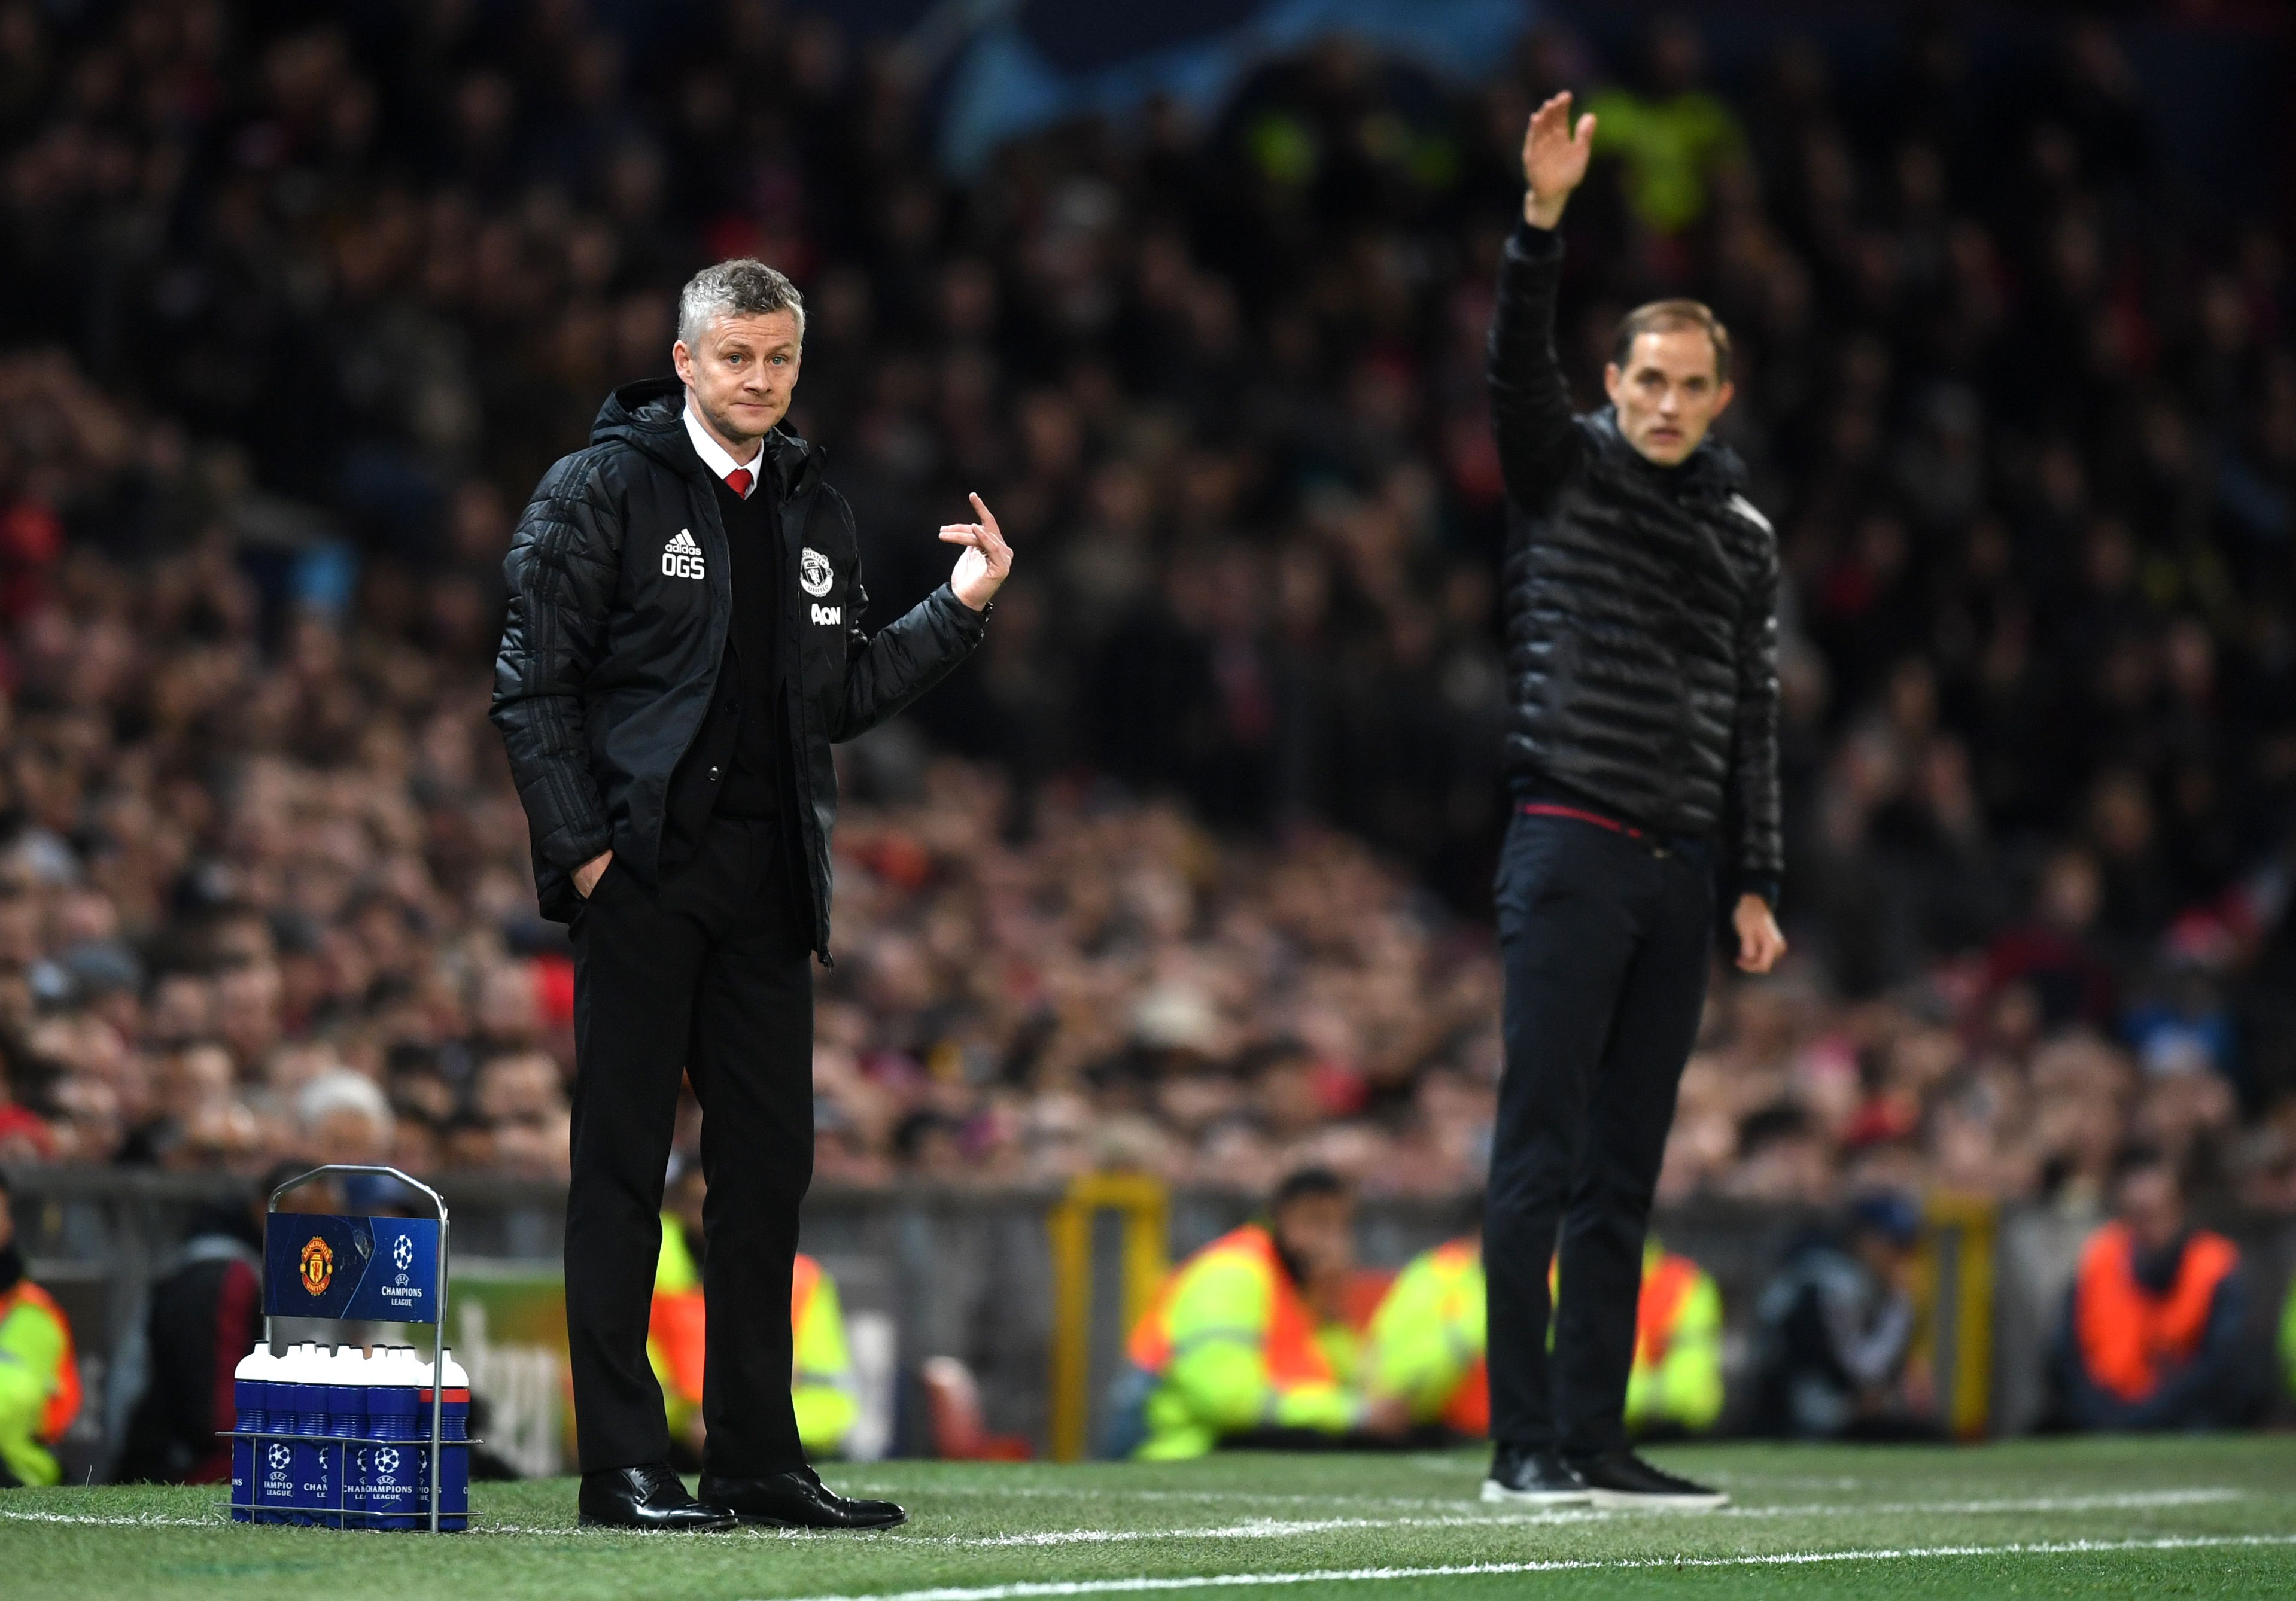 MANCHESTER, ENGLAND - FEBRUARY 12: Ole Gunnar Solskjaer, Manager of Manchester United and Thomas Tuchel, Manager of PSG stand on the touchline during the UEFA Champions League Round of 16 First Leg match between Manchester United and Paris Saint-Germain at Old Trafford on February 12, 2019 in Manchester, England. (Photo by Michael Regan/Getty Images)